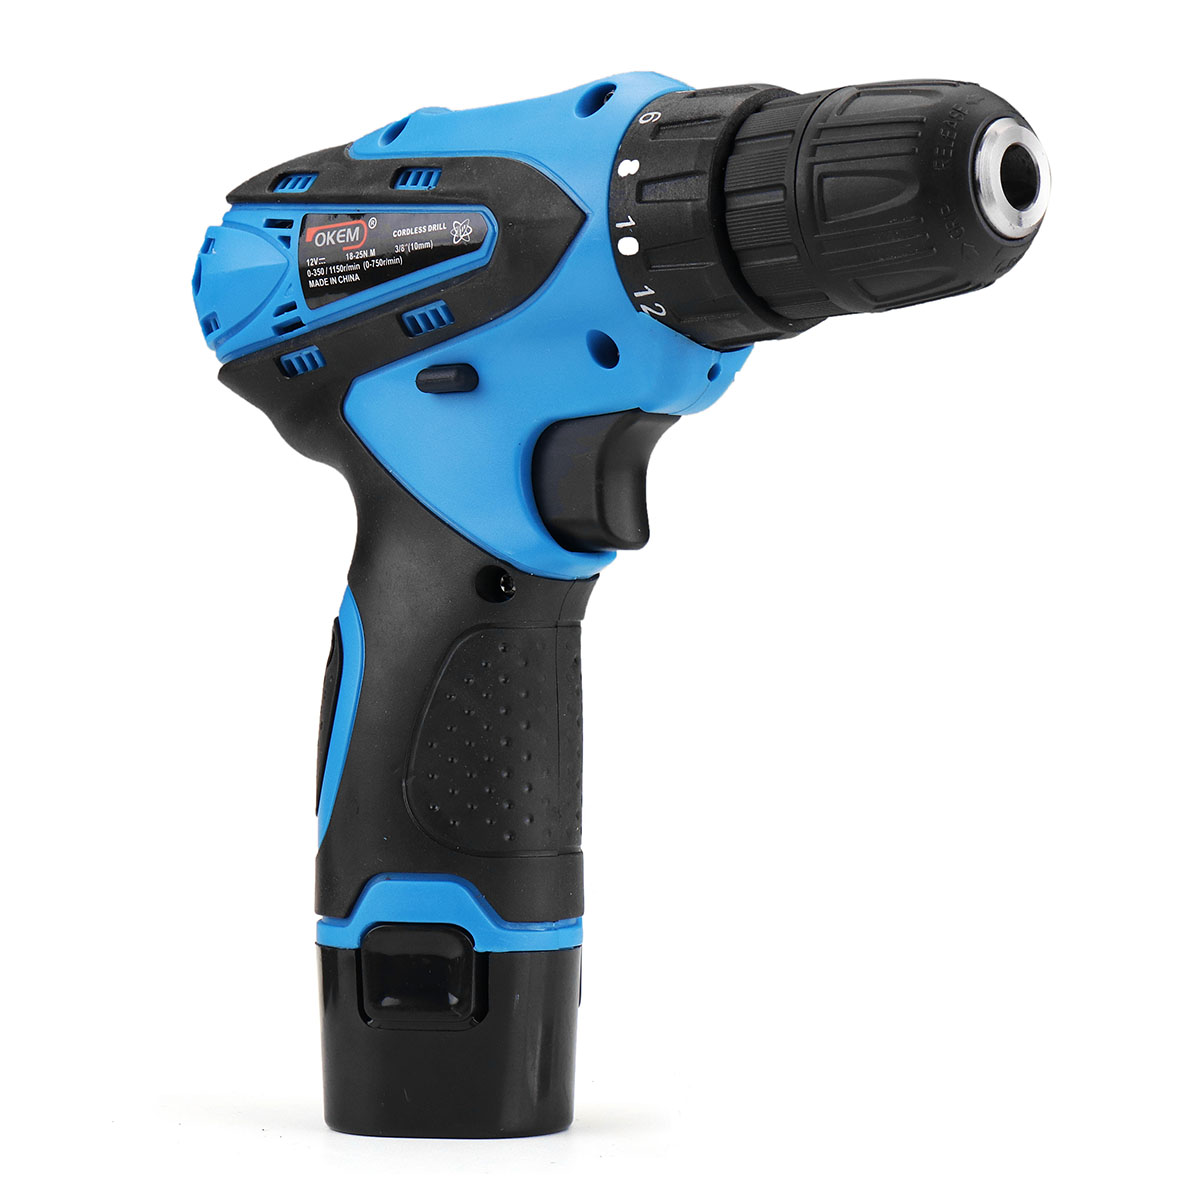 12V-1300mAh-Cordless-Drill-Driver-Screw-Electric-Screwdriver-with-2-Lithium-ion-Battery-1405686